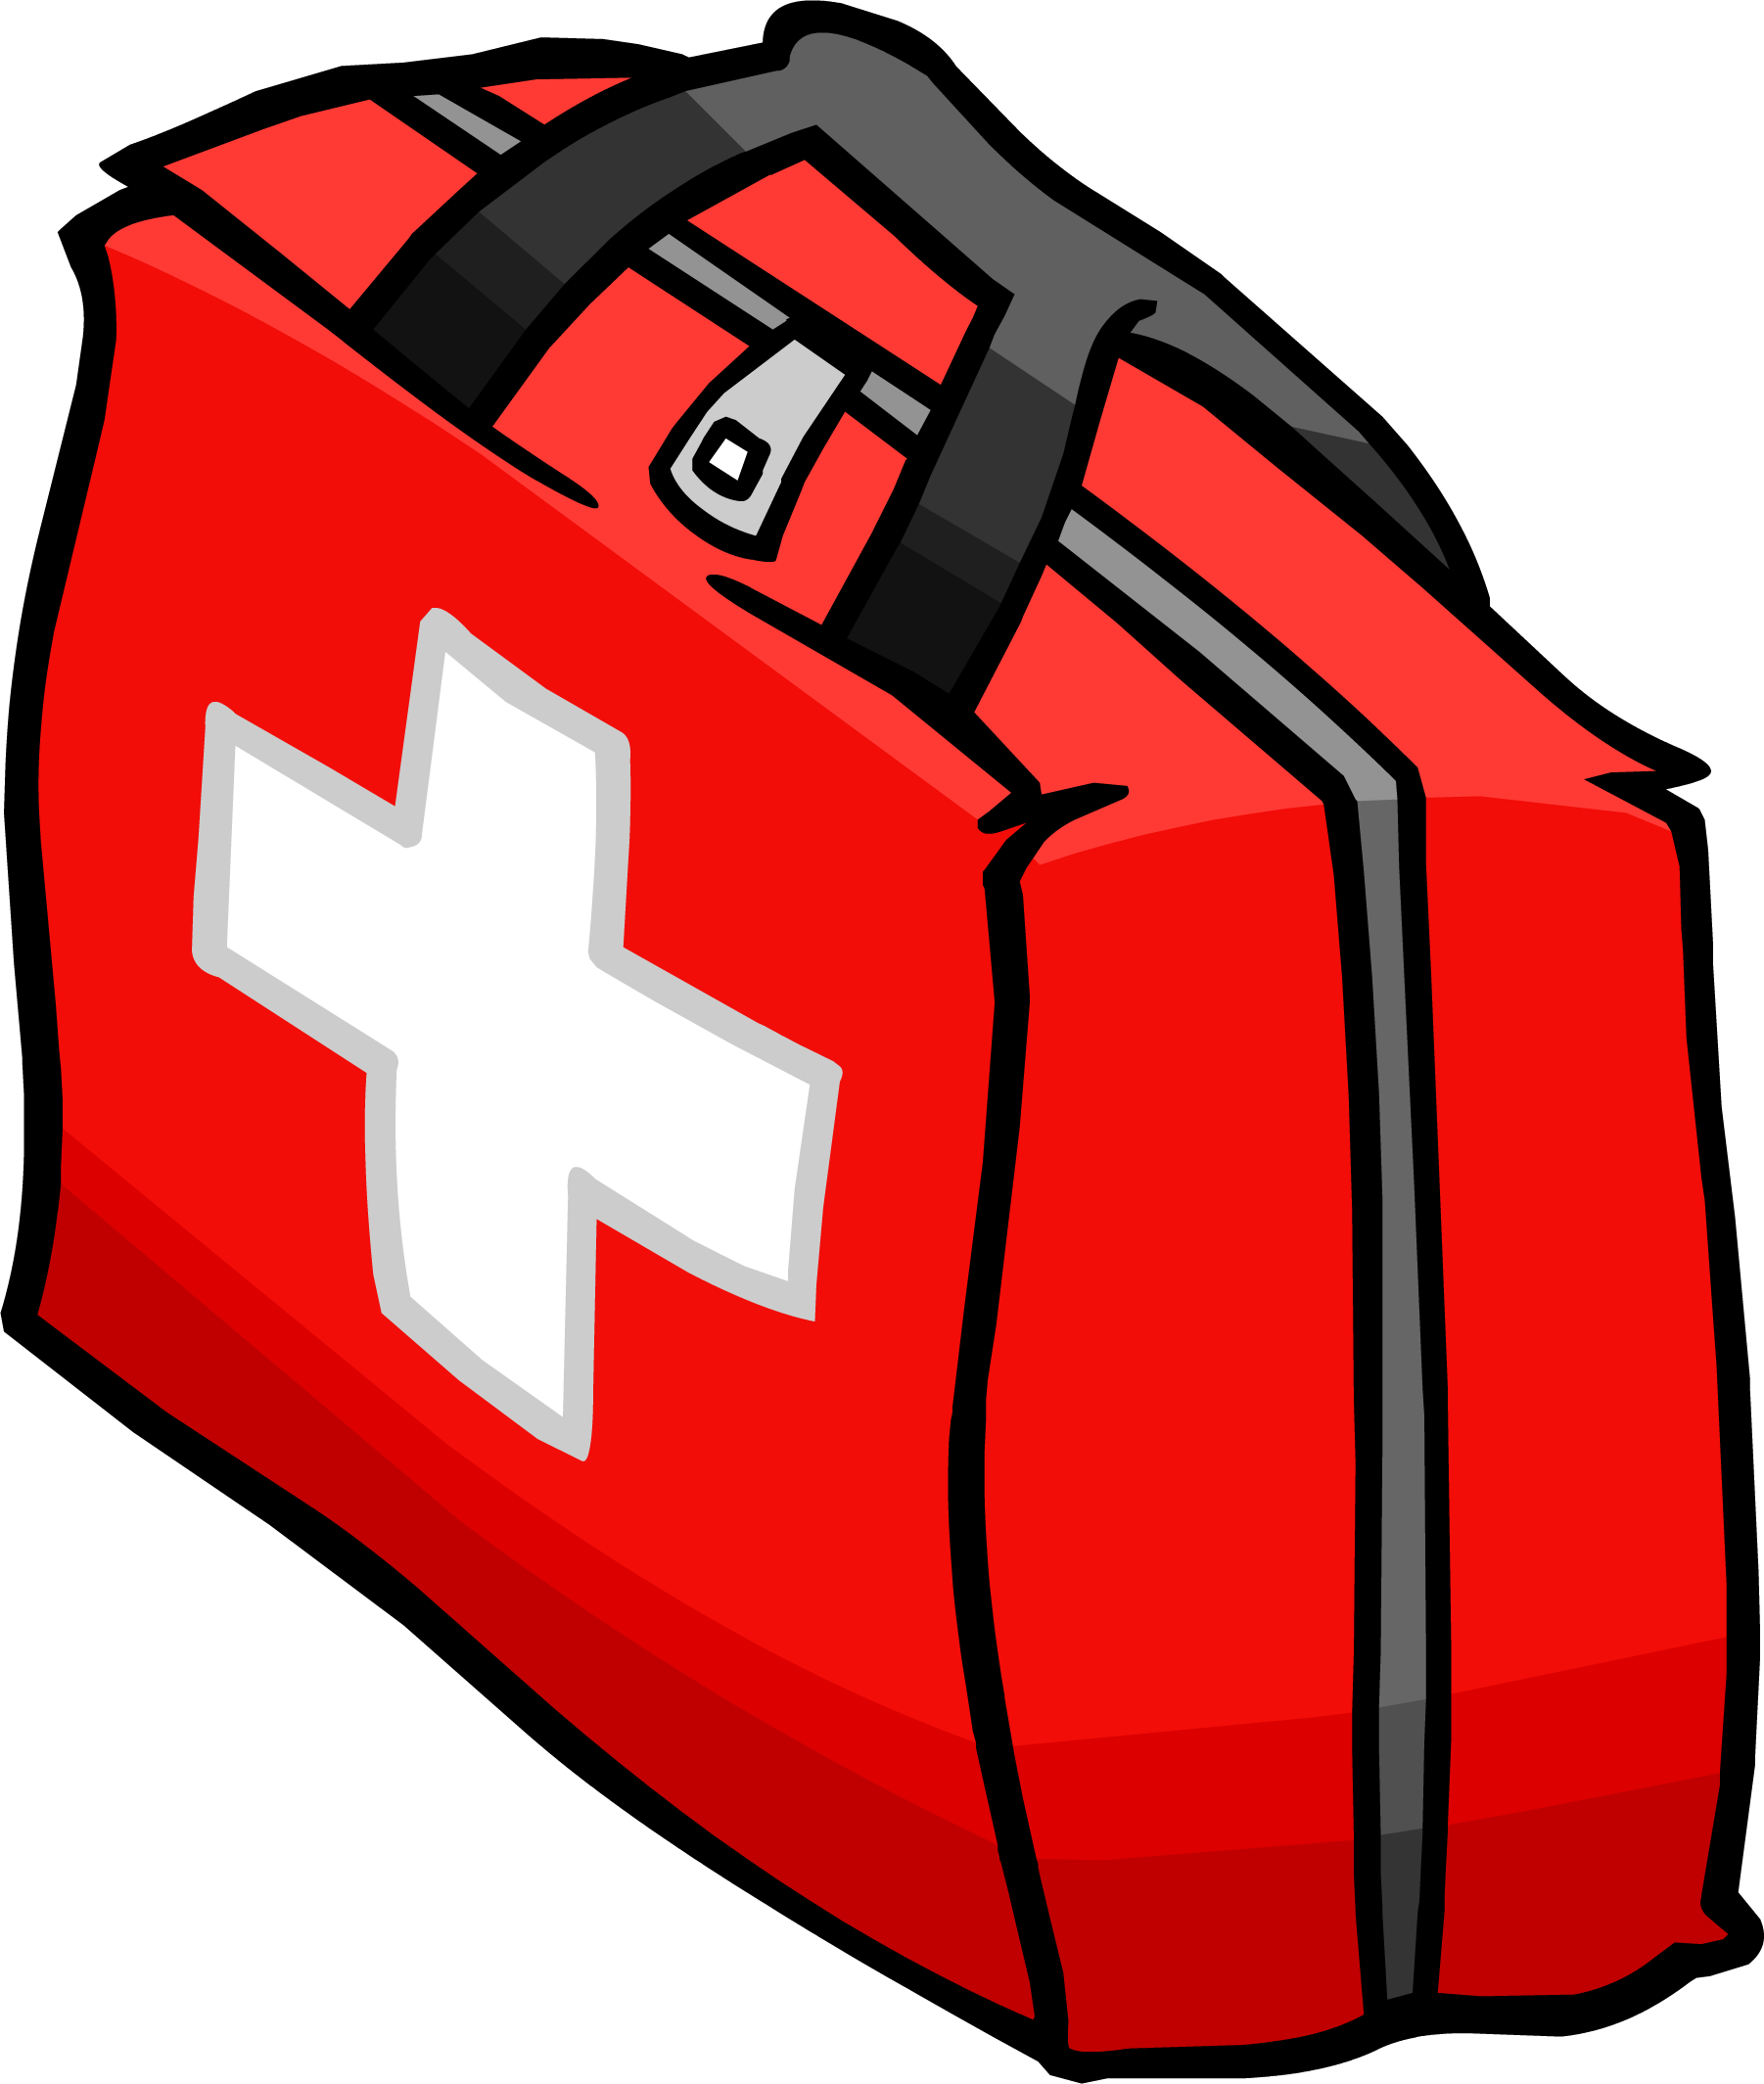 First aid kit clipart images